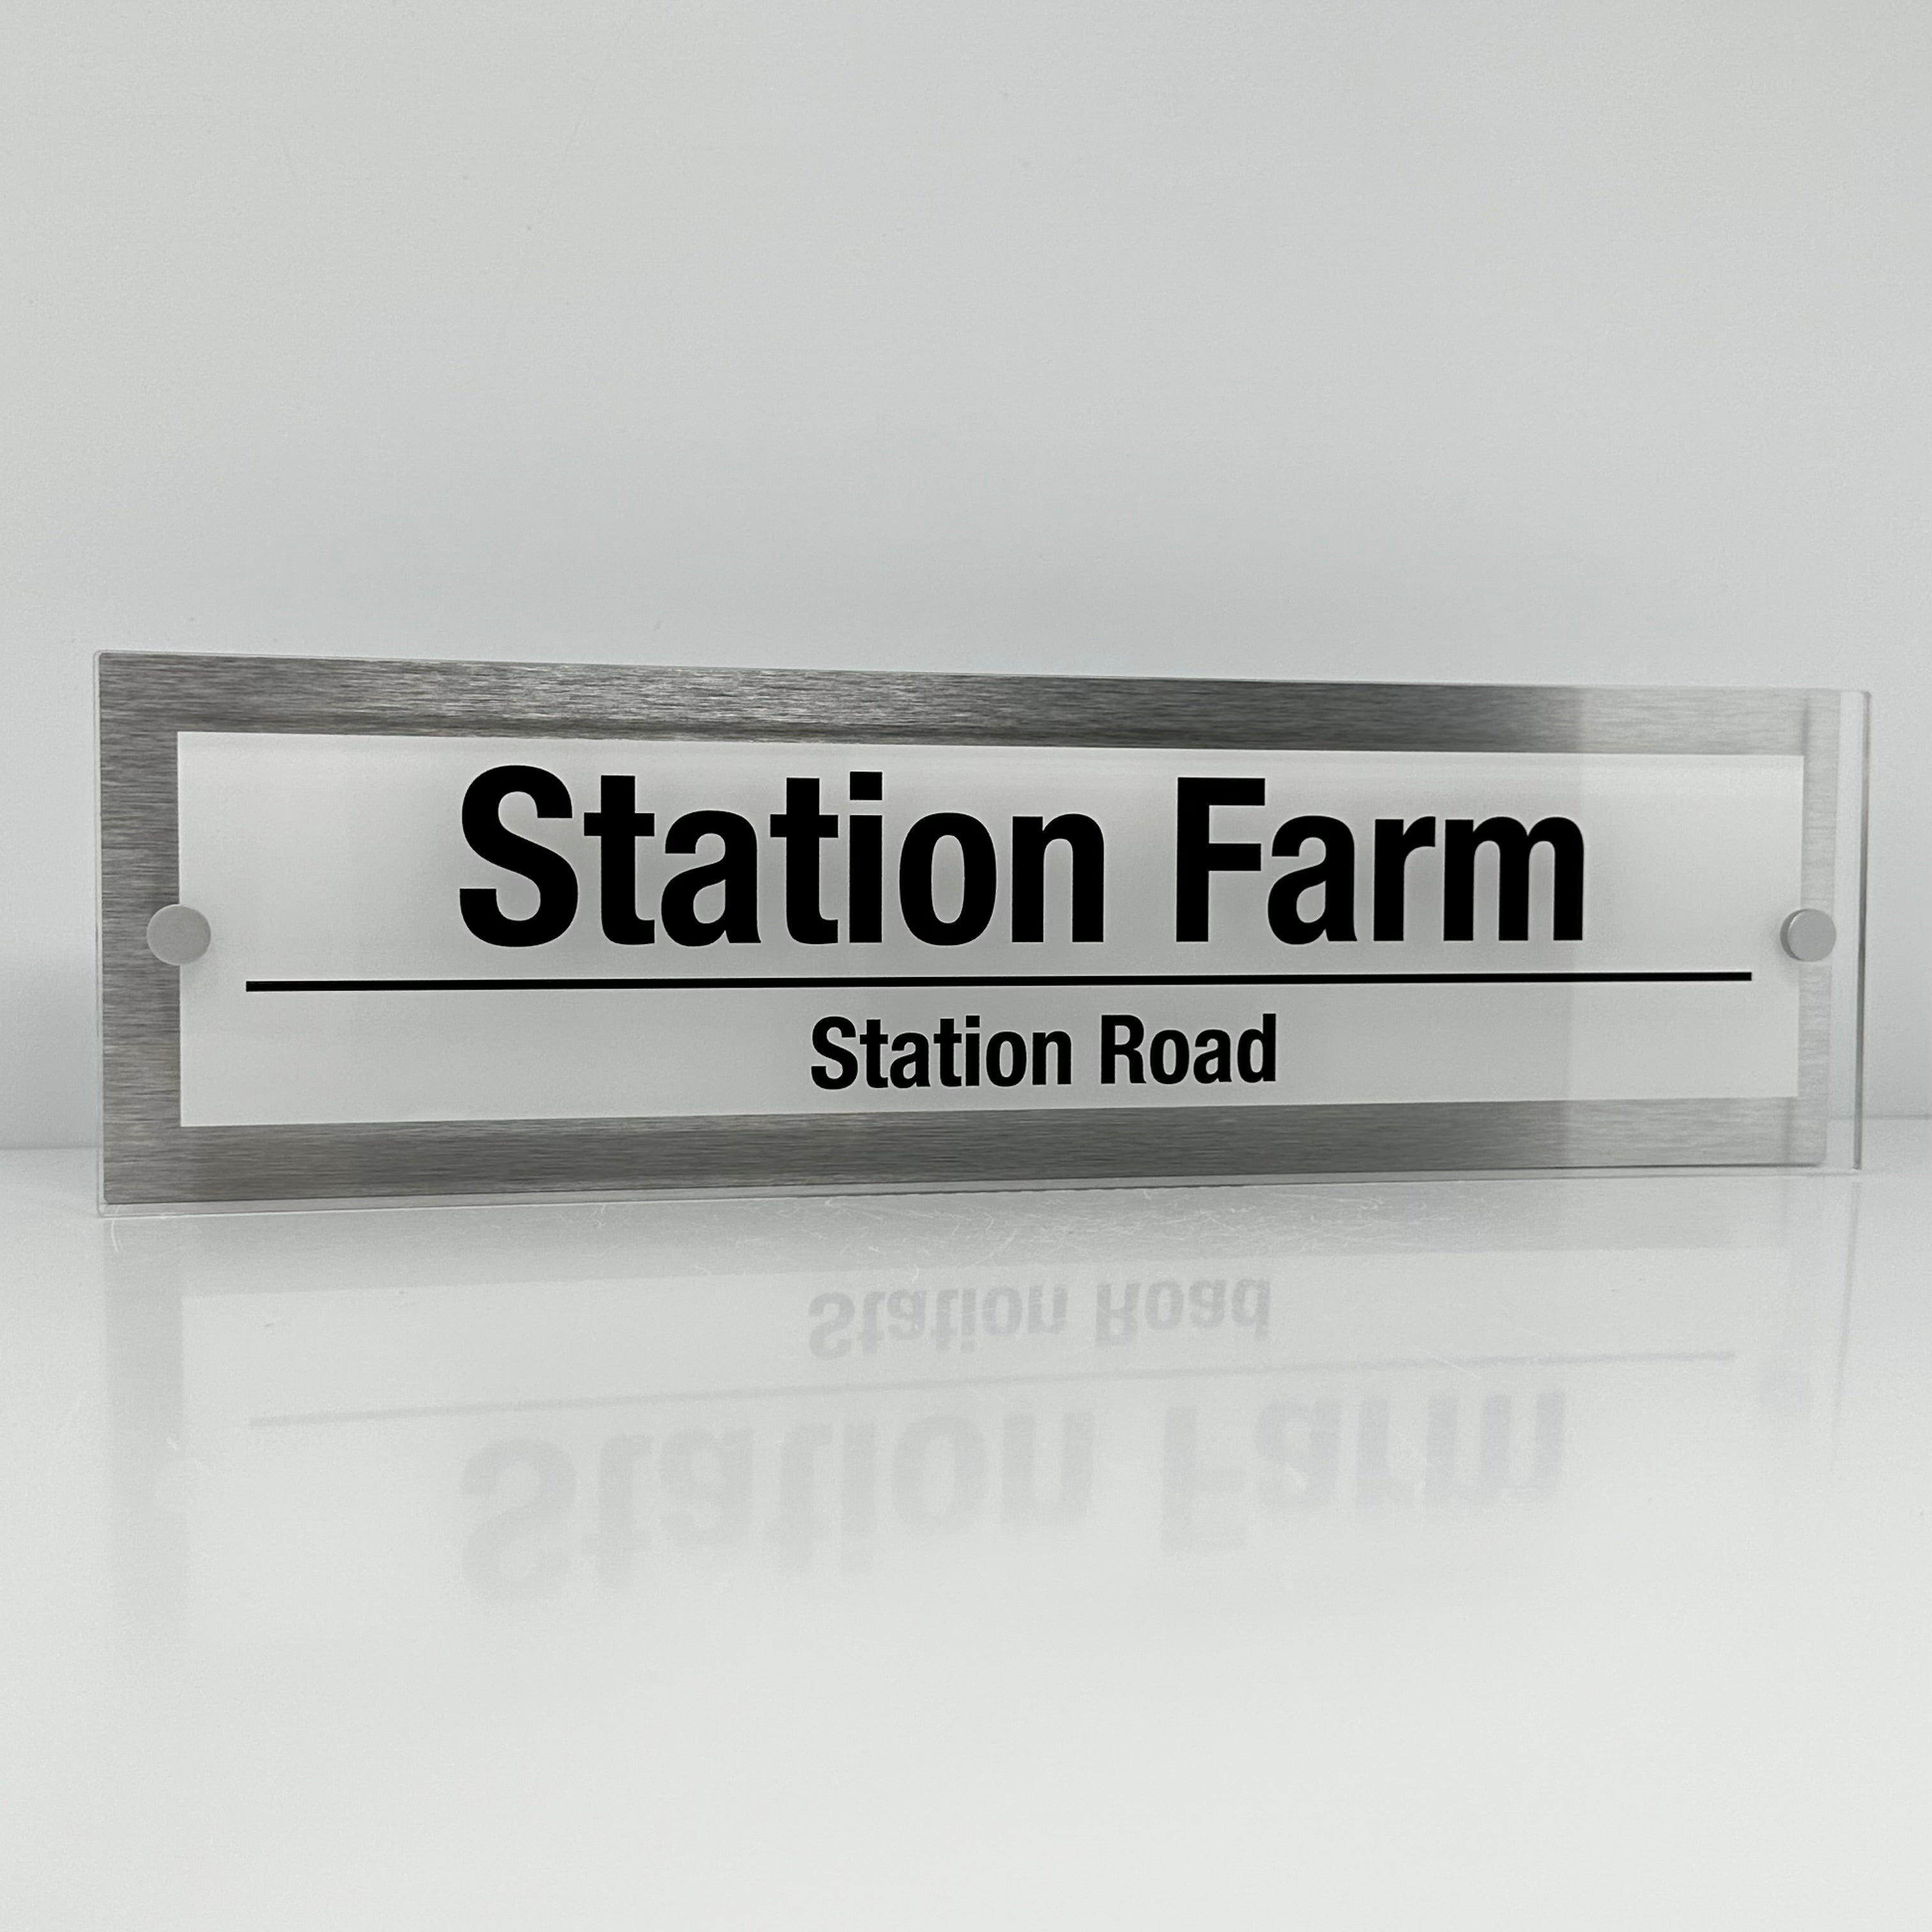 The Station Farm Modern House Sign with Perspex Acrylic Front, Silver Rear Panel and Satin Silver Stand Off Fixings ( Size - 42cm x 12cm - WHITE BACKGROUND BLACK TEXT )